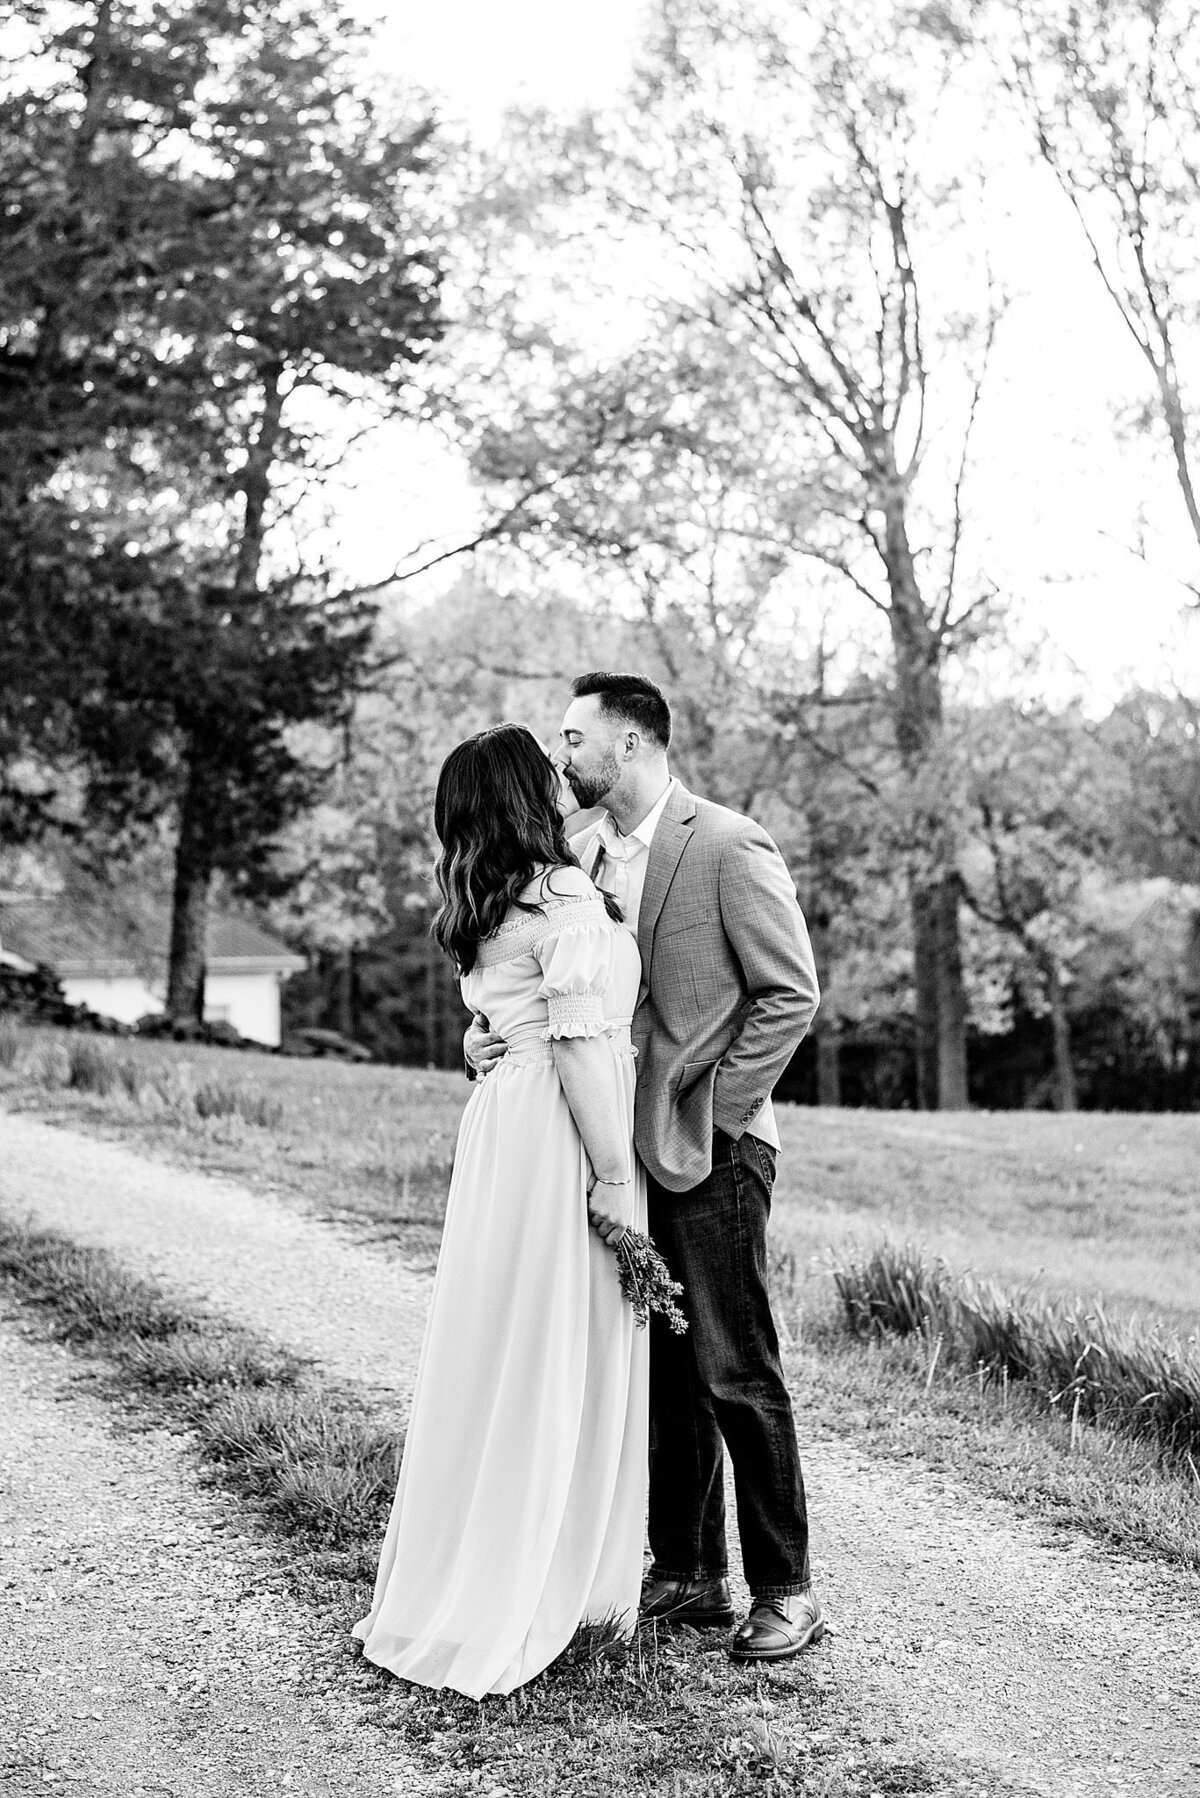 A black and white image of the bride and groom kissing on a gravel pathway next to a field with trees in the background. The bride is wearing a boho maxi dress with  short puffed sleeves . She holds her small bouquet down by her side. The groom is wearing a light color sports jacket and dark pants with a white shirt. He has one arm around the bride's waist and one hand in his pocket.